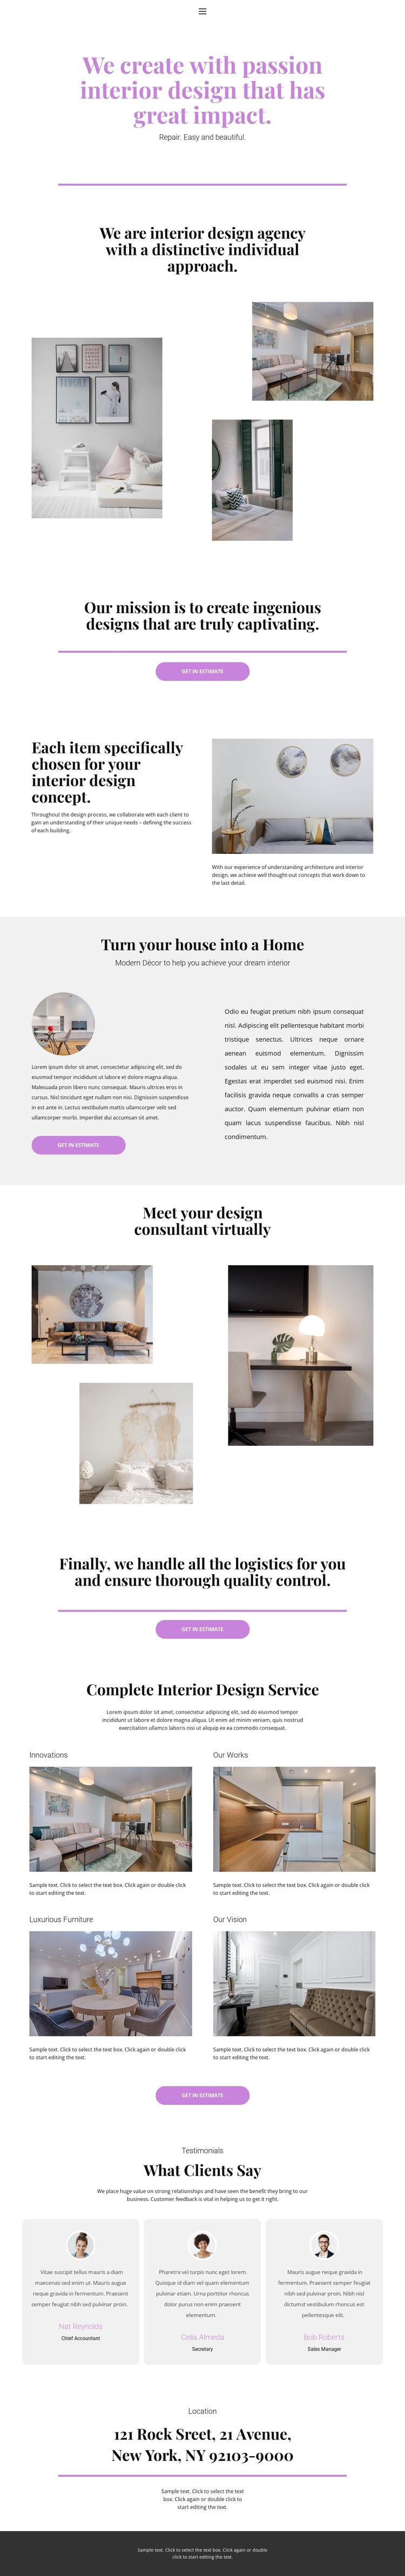 Choice of design for the house WordPress Theme